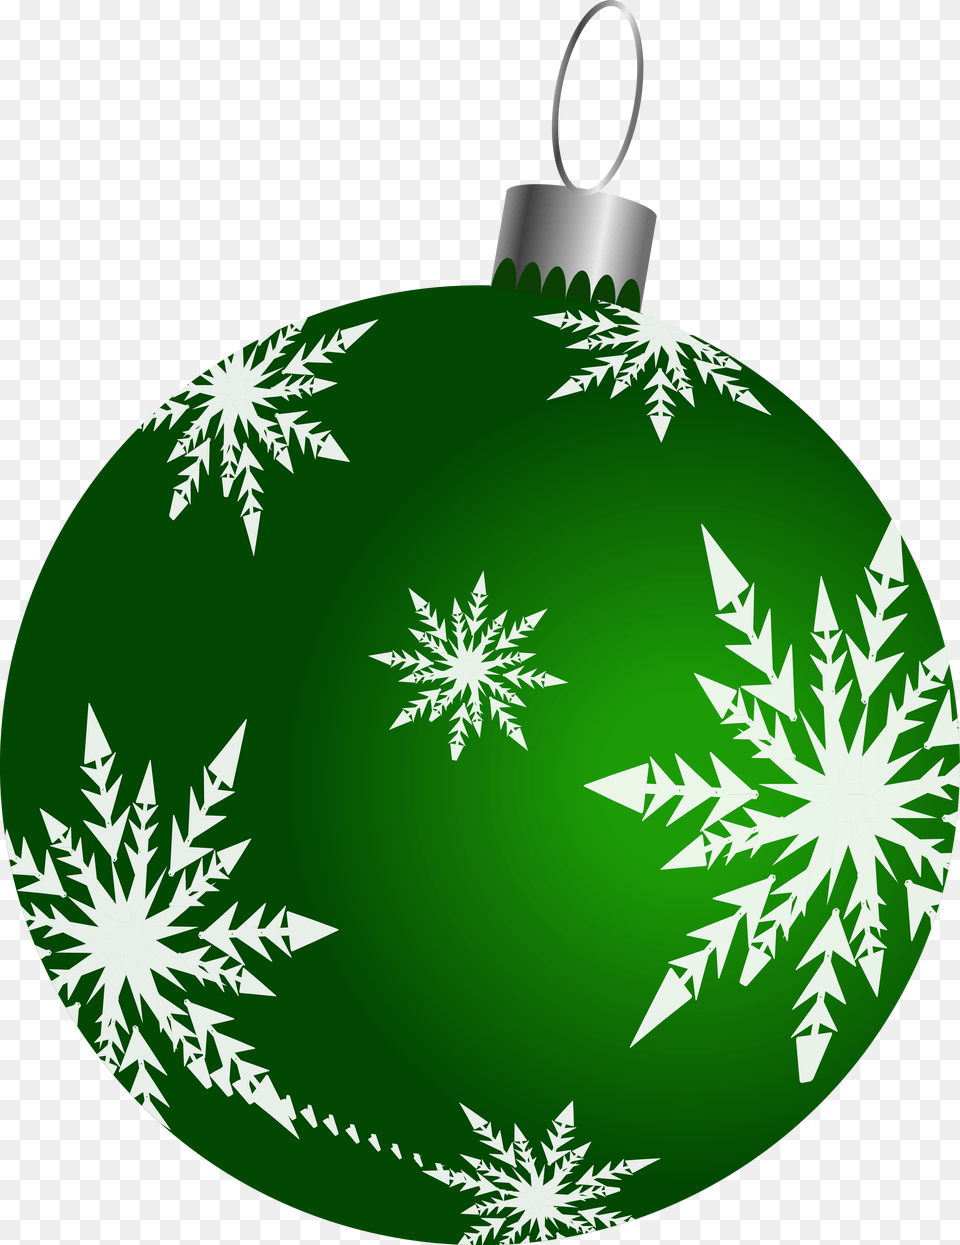 December Balls Tree Ornament Artificial Amazing Year Christmas Ornament, Accessories, Green, Food, Ketchup Png